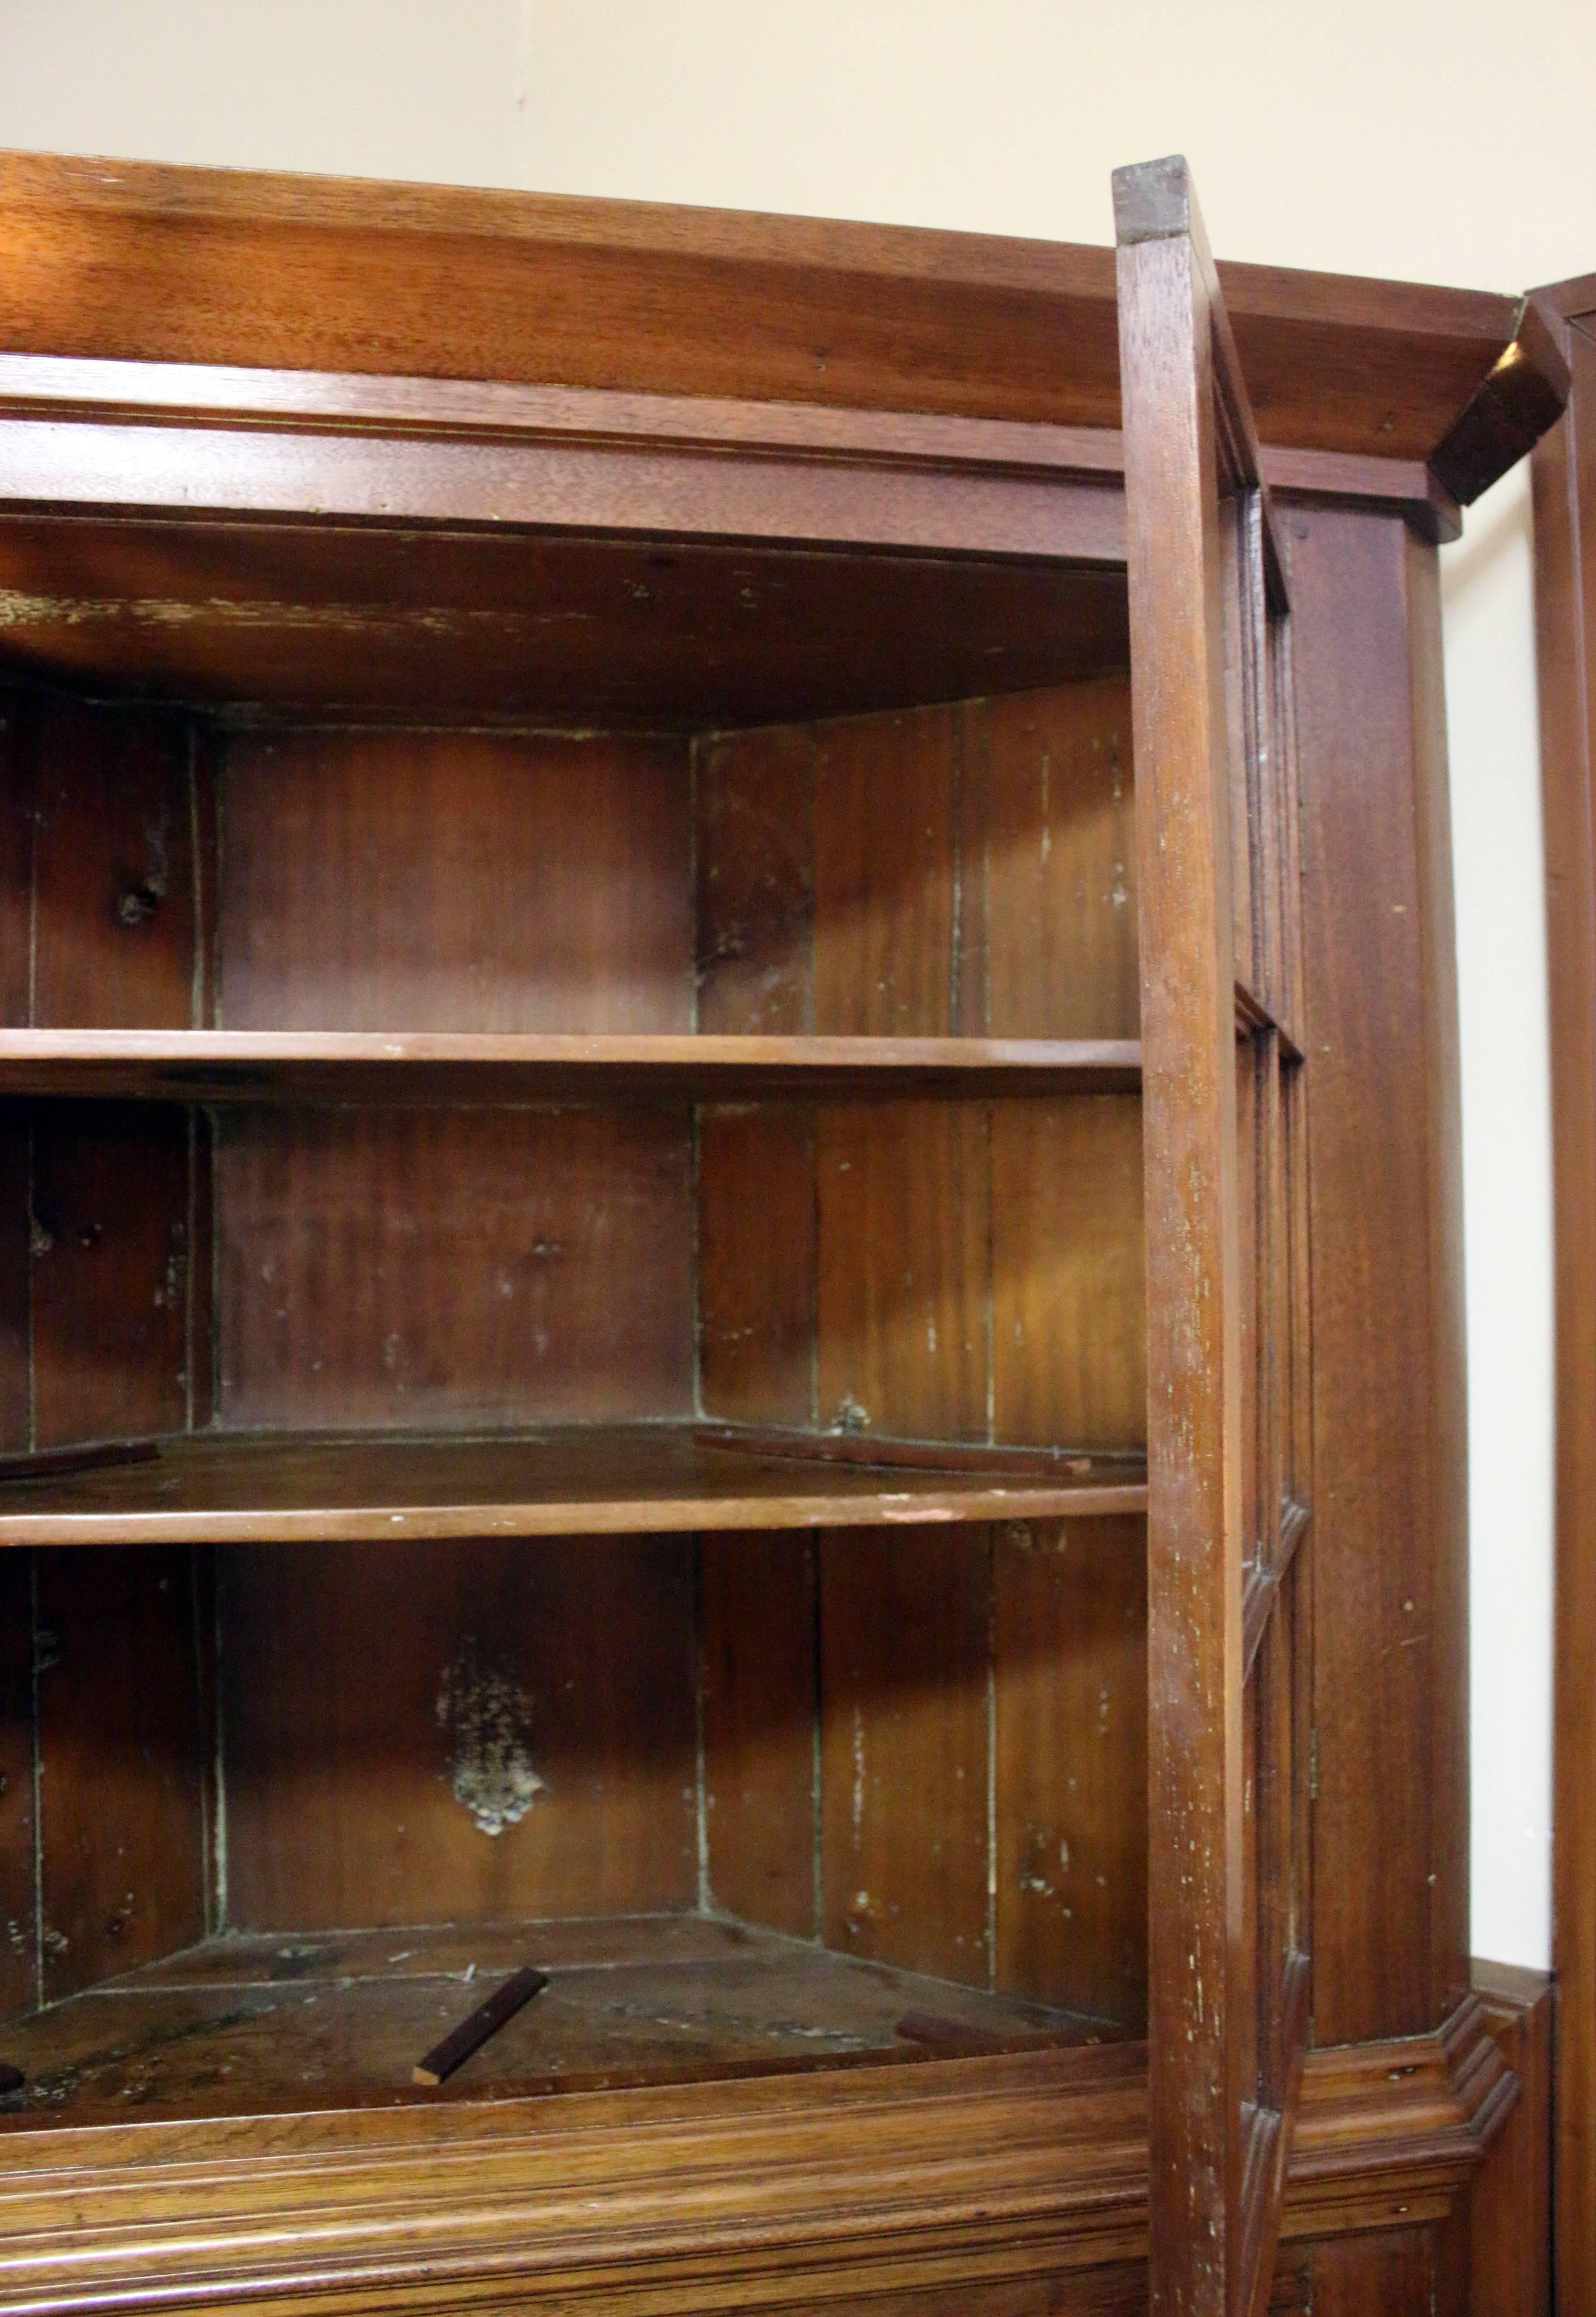 Primitive walnut corner cupboard from the mid Atlantic region. The 12 panes of old wavy glass appear to be original. There is no evidence that it ever had hardware, but the doors open and shut perfectly and the outer finish is original. The interior